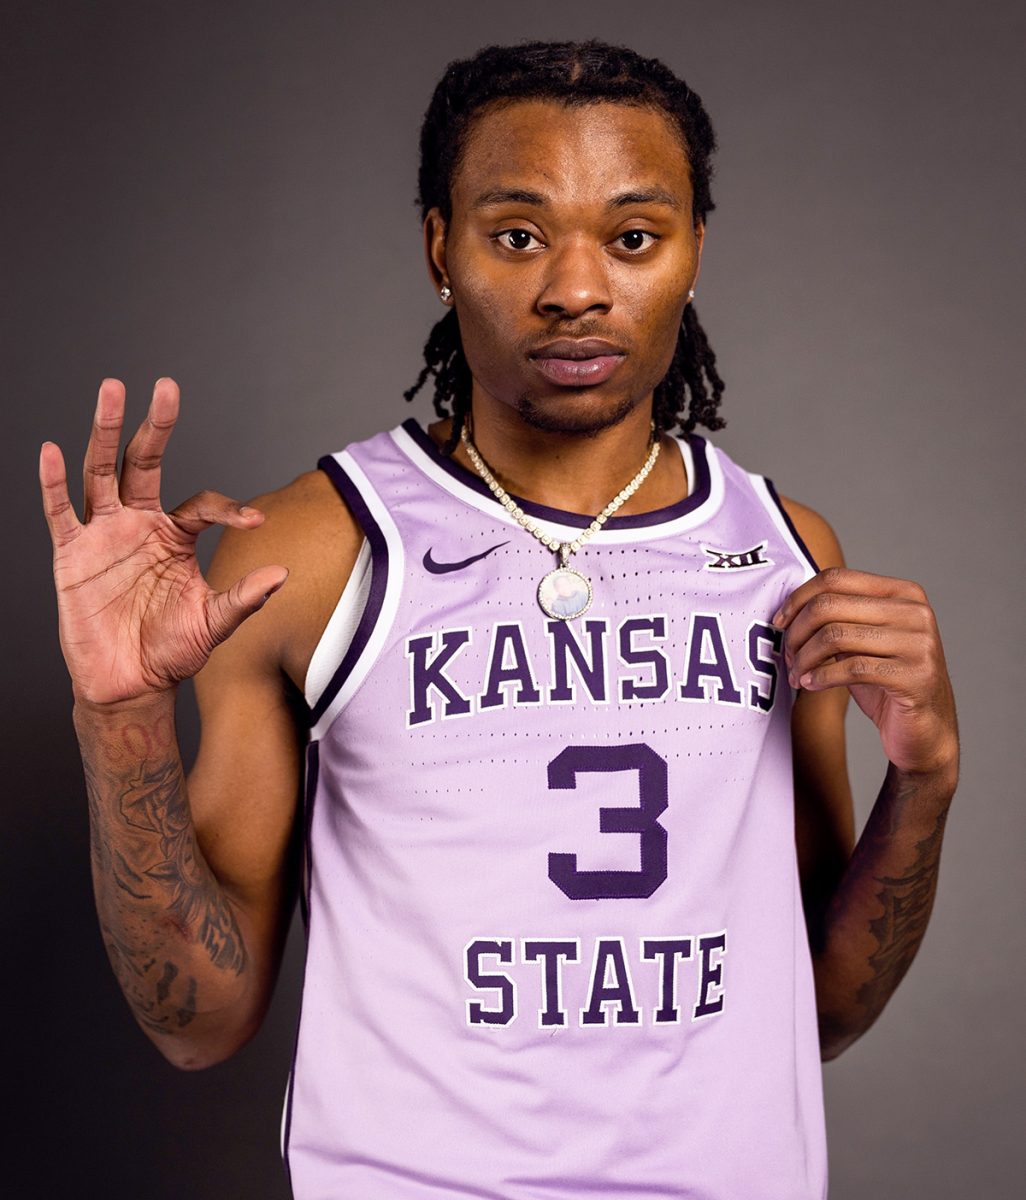 ICU transfer forward CJ Jones posses for a photo on his visit to K-State. Jones has committed to K-State after averaging 11.4 points, 4.8 assists and 3.5 rebounds during his sophomore campaign this year. (Photo courtesy of K-State Athletics)